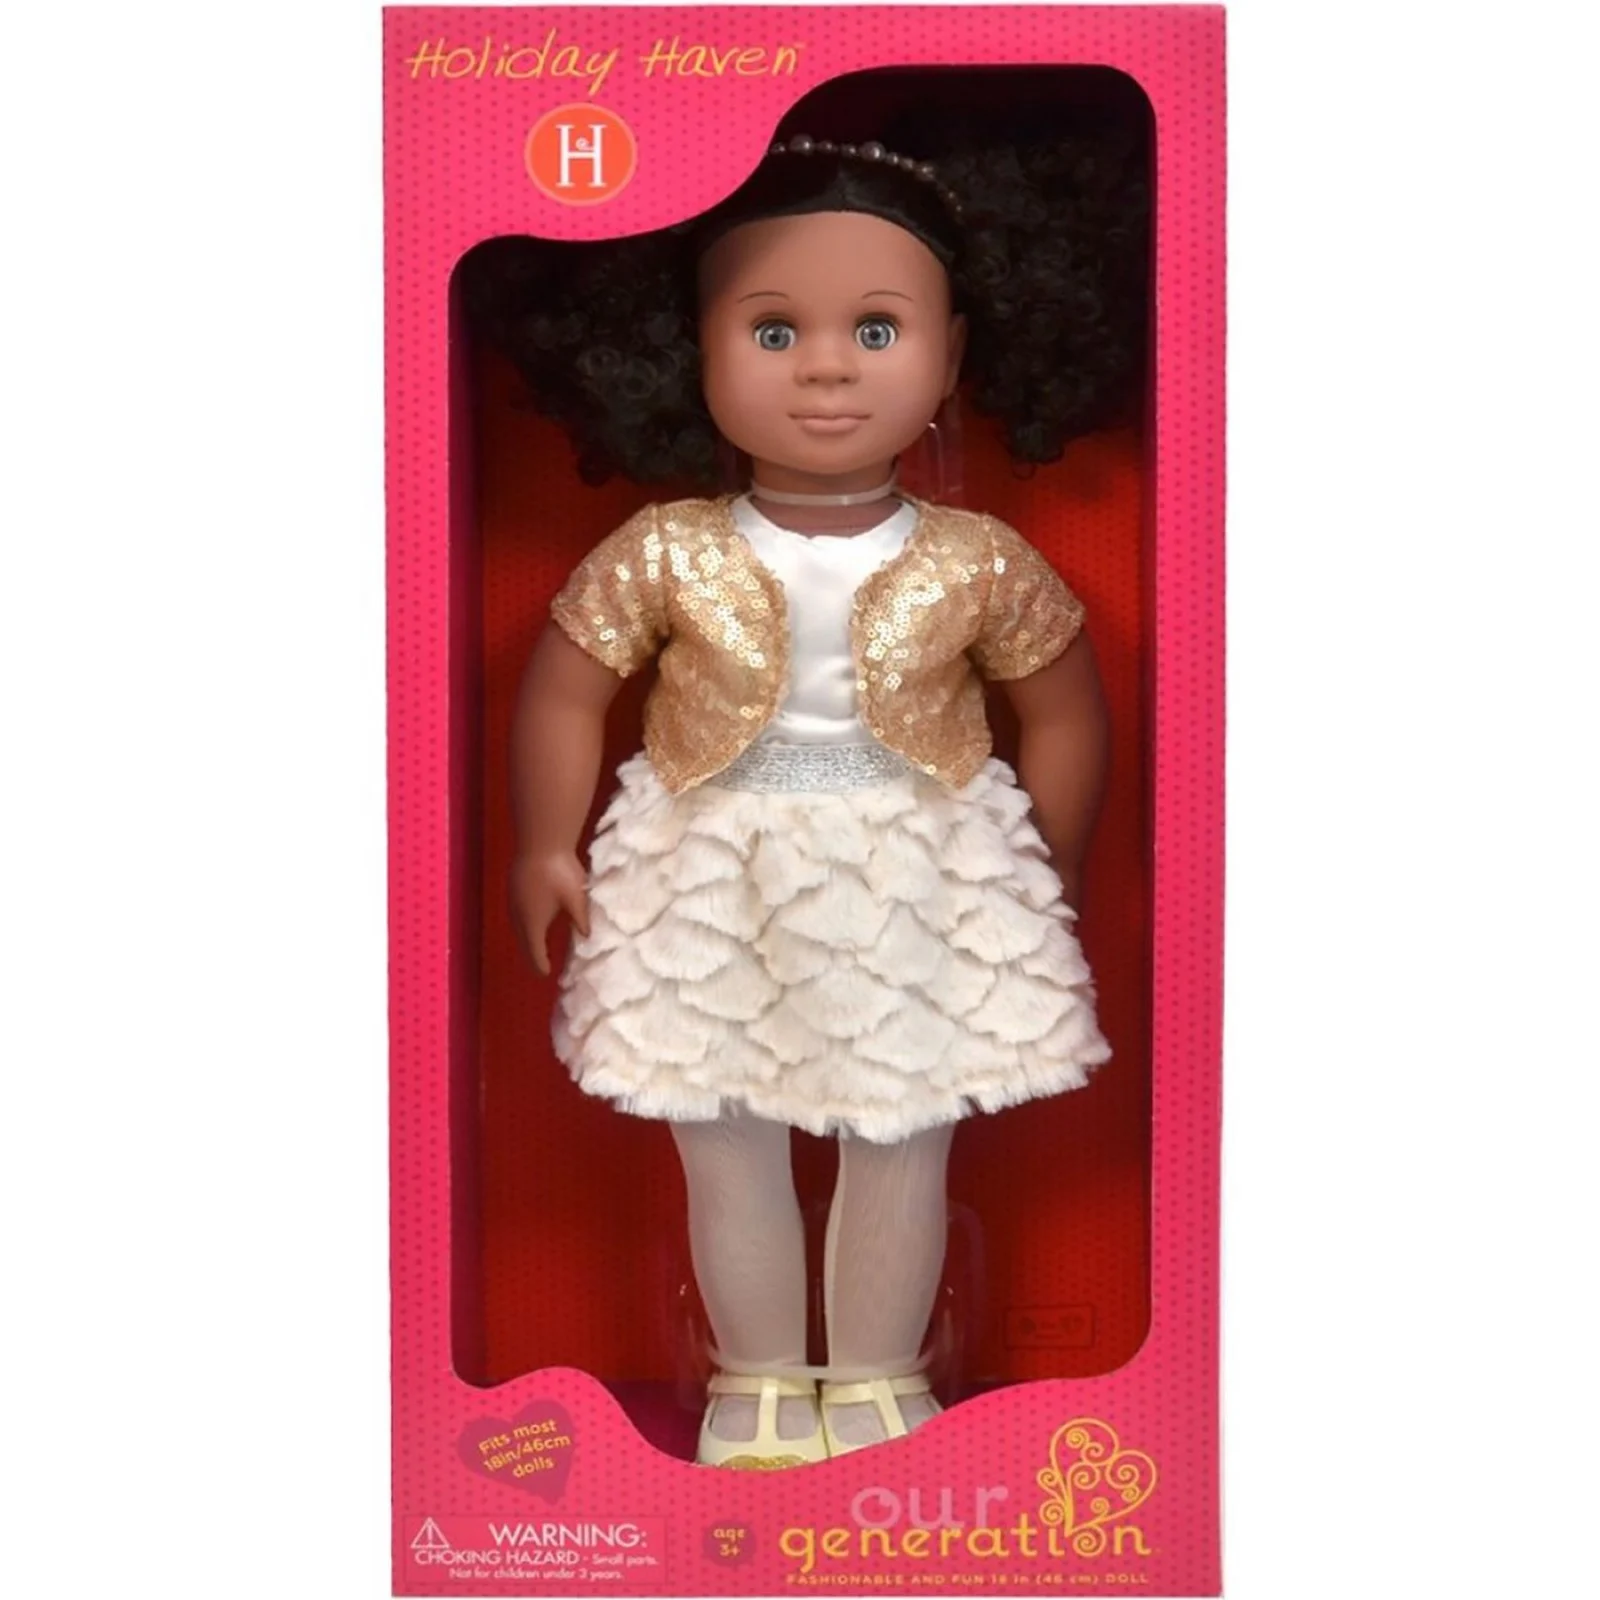 Our Generation Holiday Haven Doll-Best Cute Doll Toys for Baby Girls